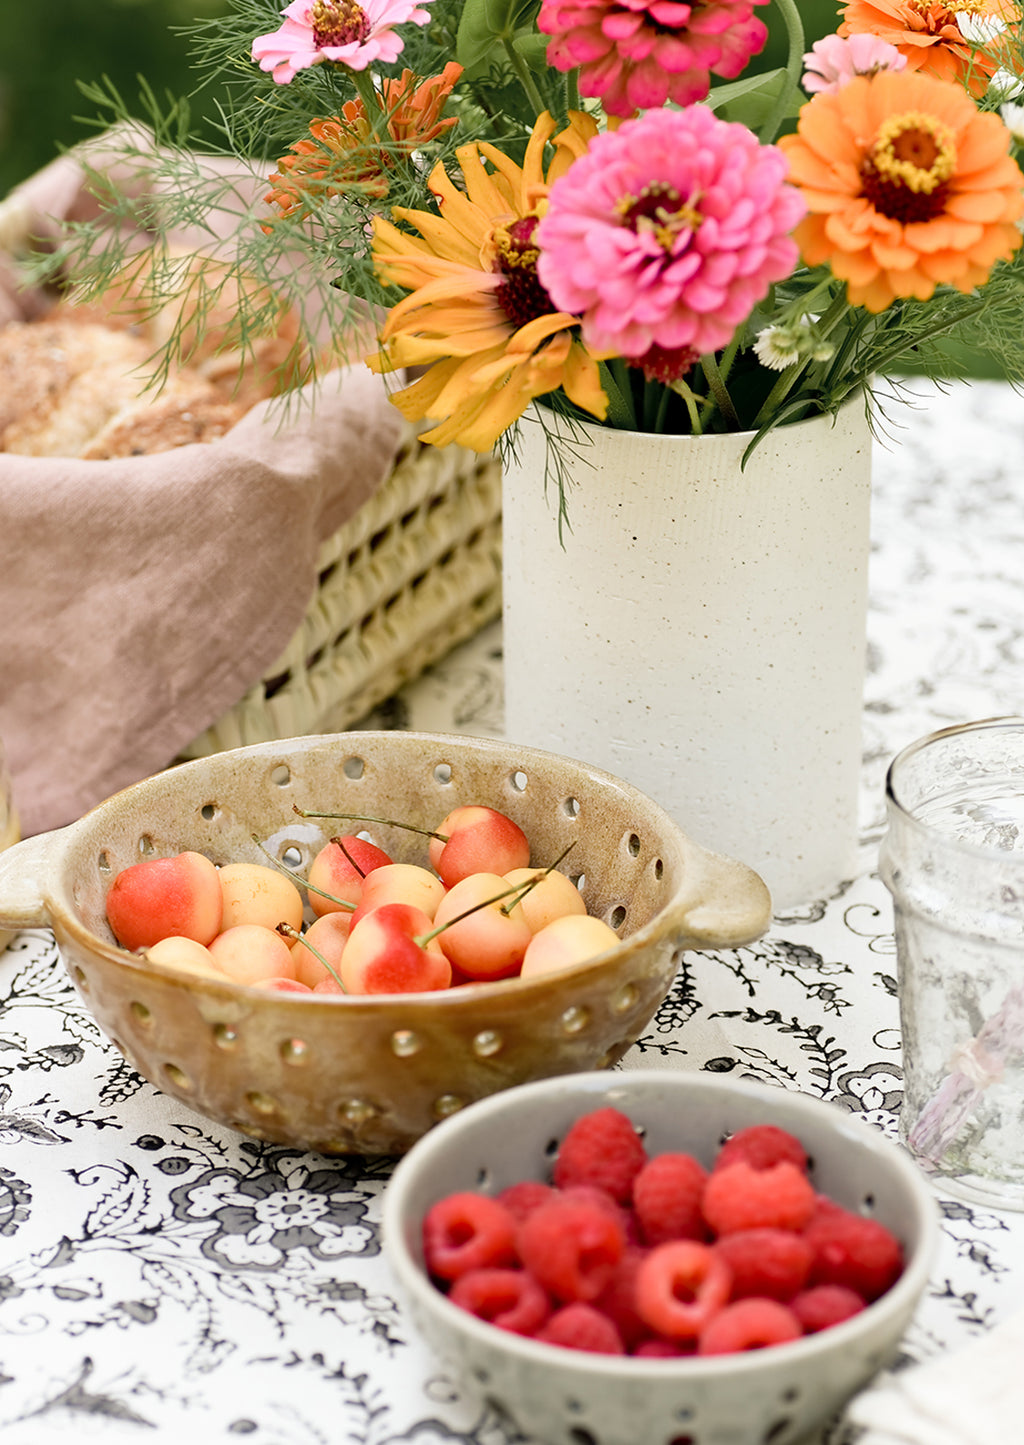 2: A vase with flowers on table with berry bowls.